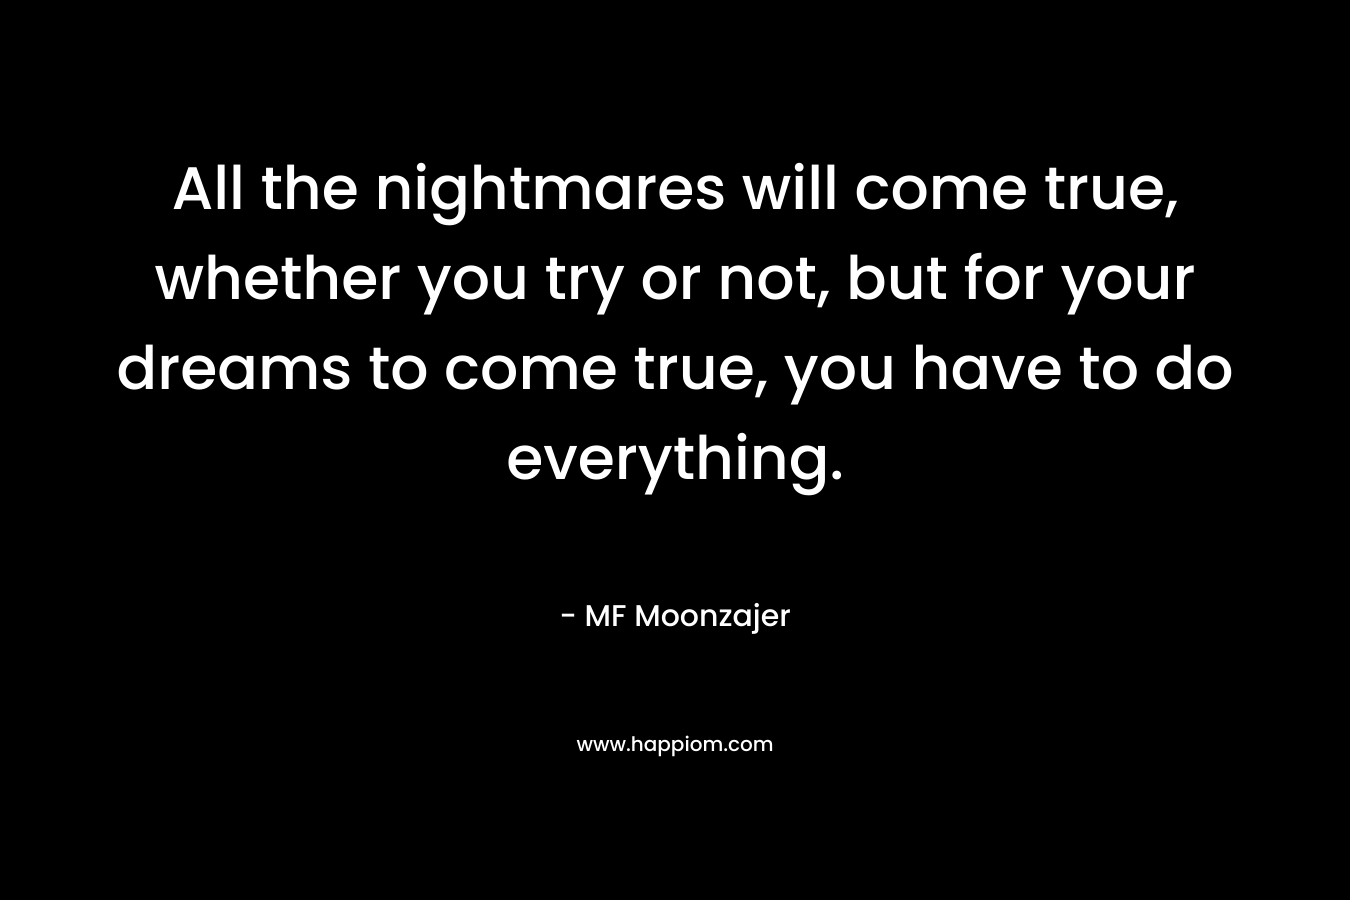 All the nightmares will come true, whether you try or not, but for your dreams to come true, you have to do everything. – MF Moonzajer